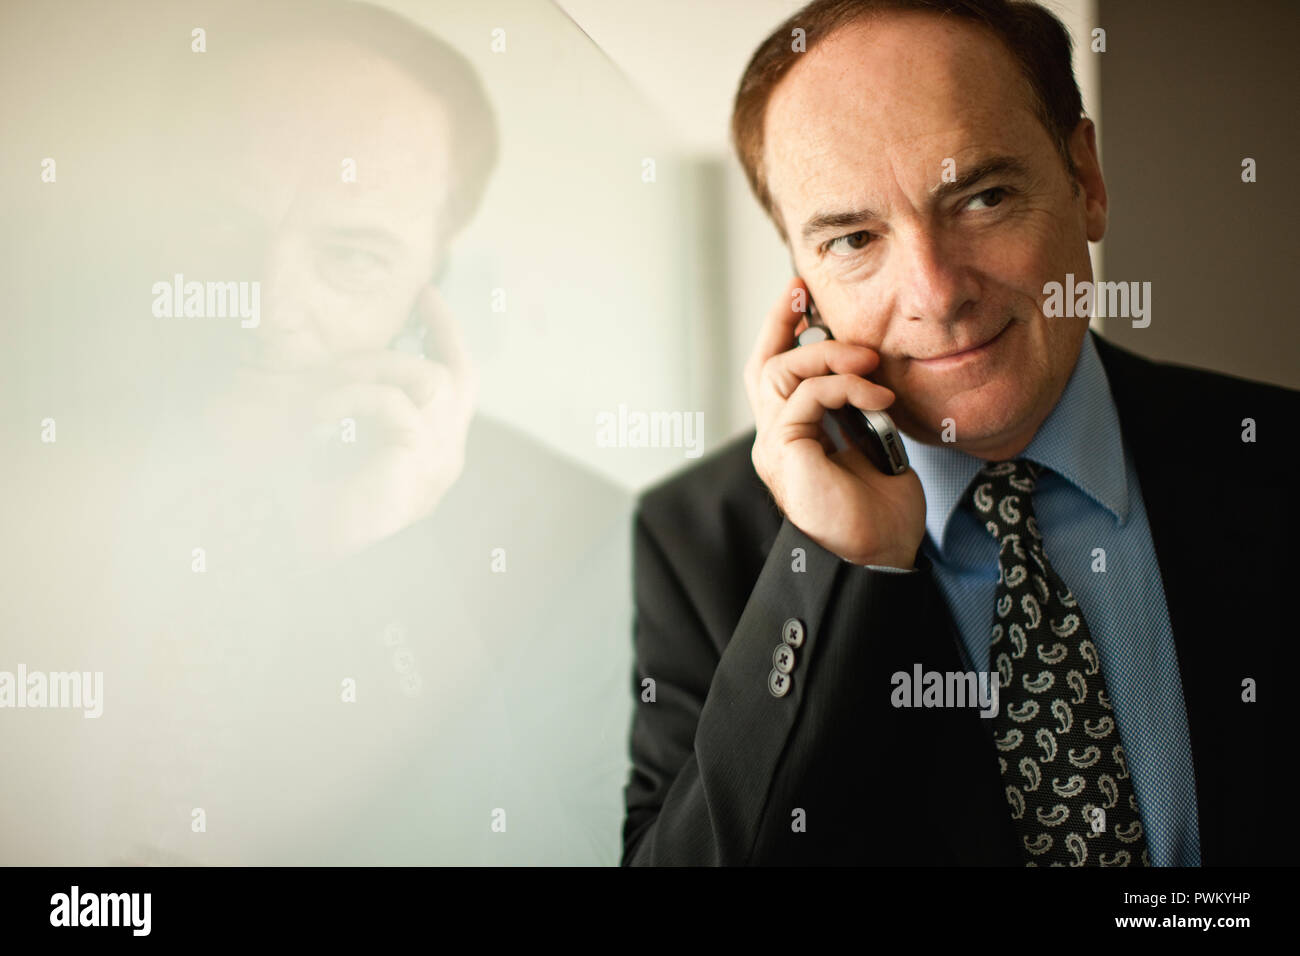 Businessman in suit talks on cellphone. Stock Photo